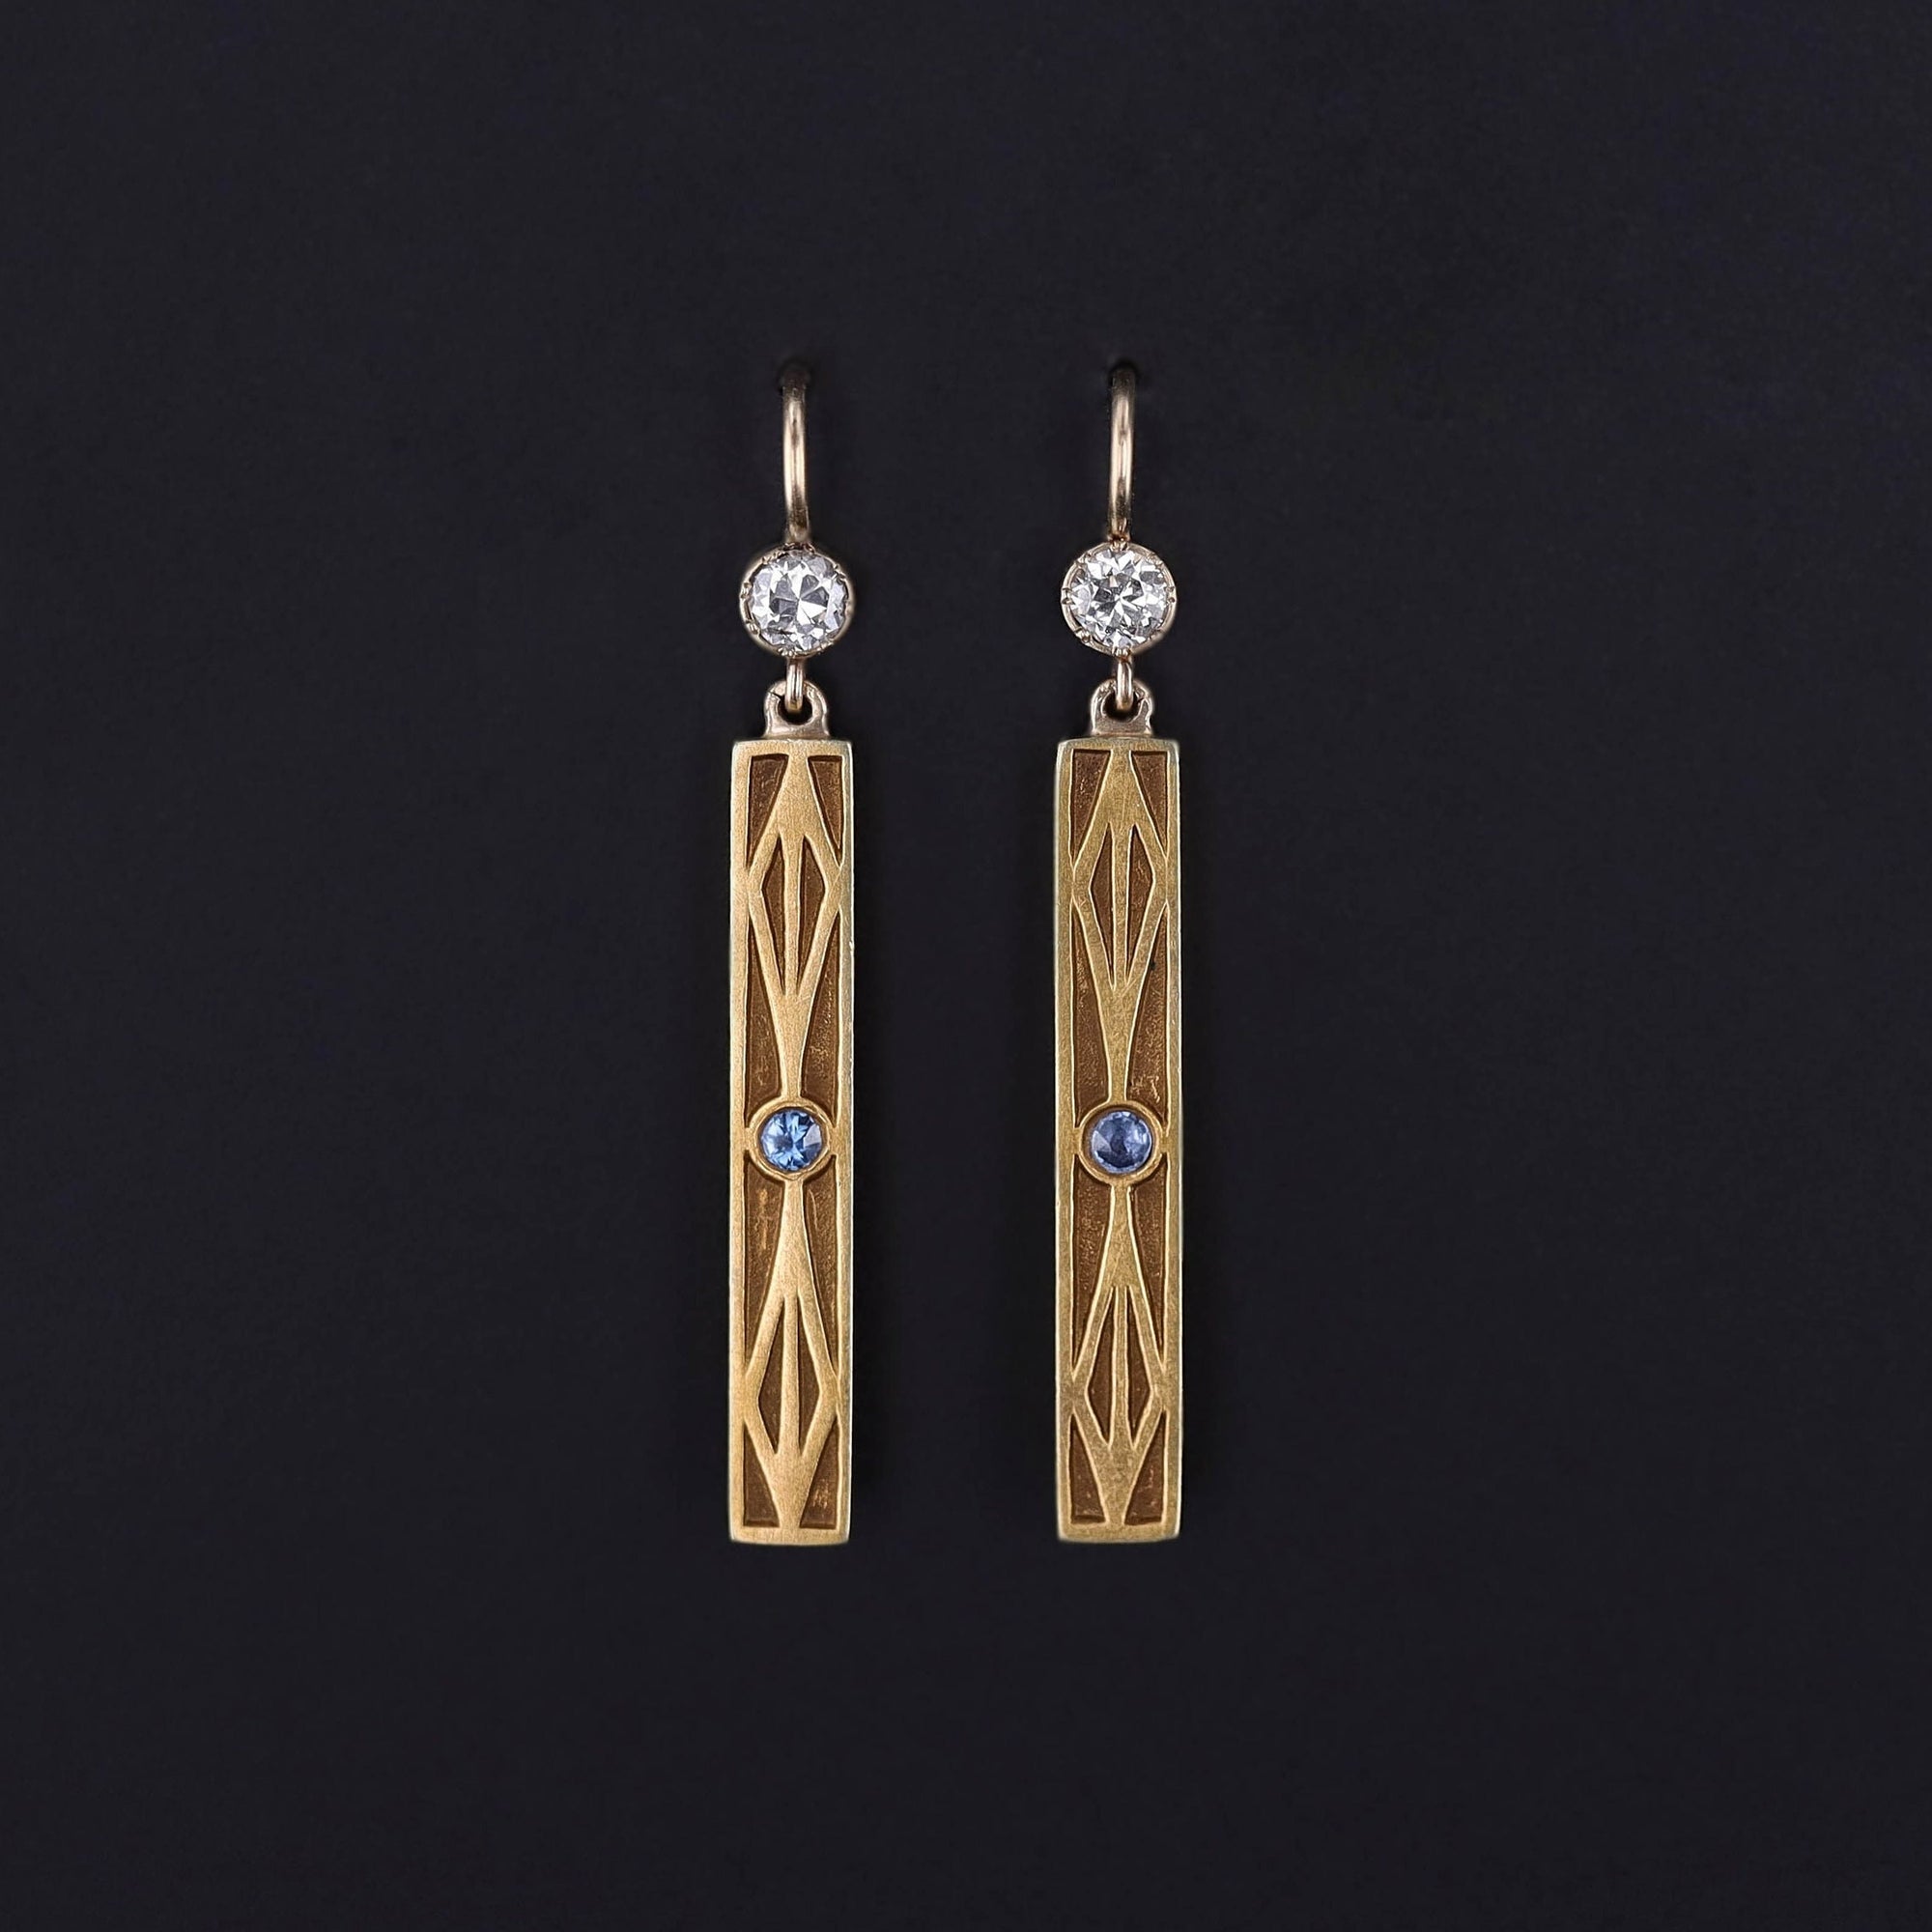 Antique Sapphire Earrings: Upcycled earrings created from antique bar pins dating to the turn of the 20th century (circa 1910). The rectangular 14k gold drops are adorned with sapphires and accented with diamond surmounts.